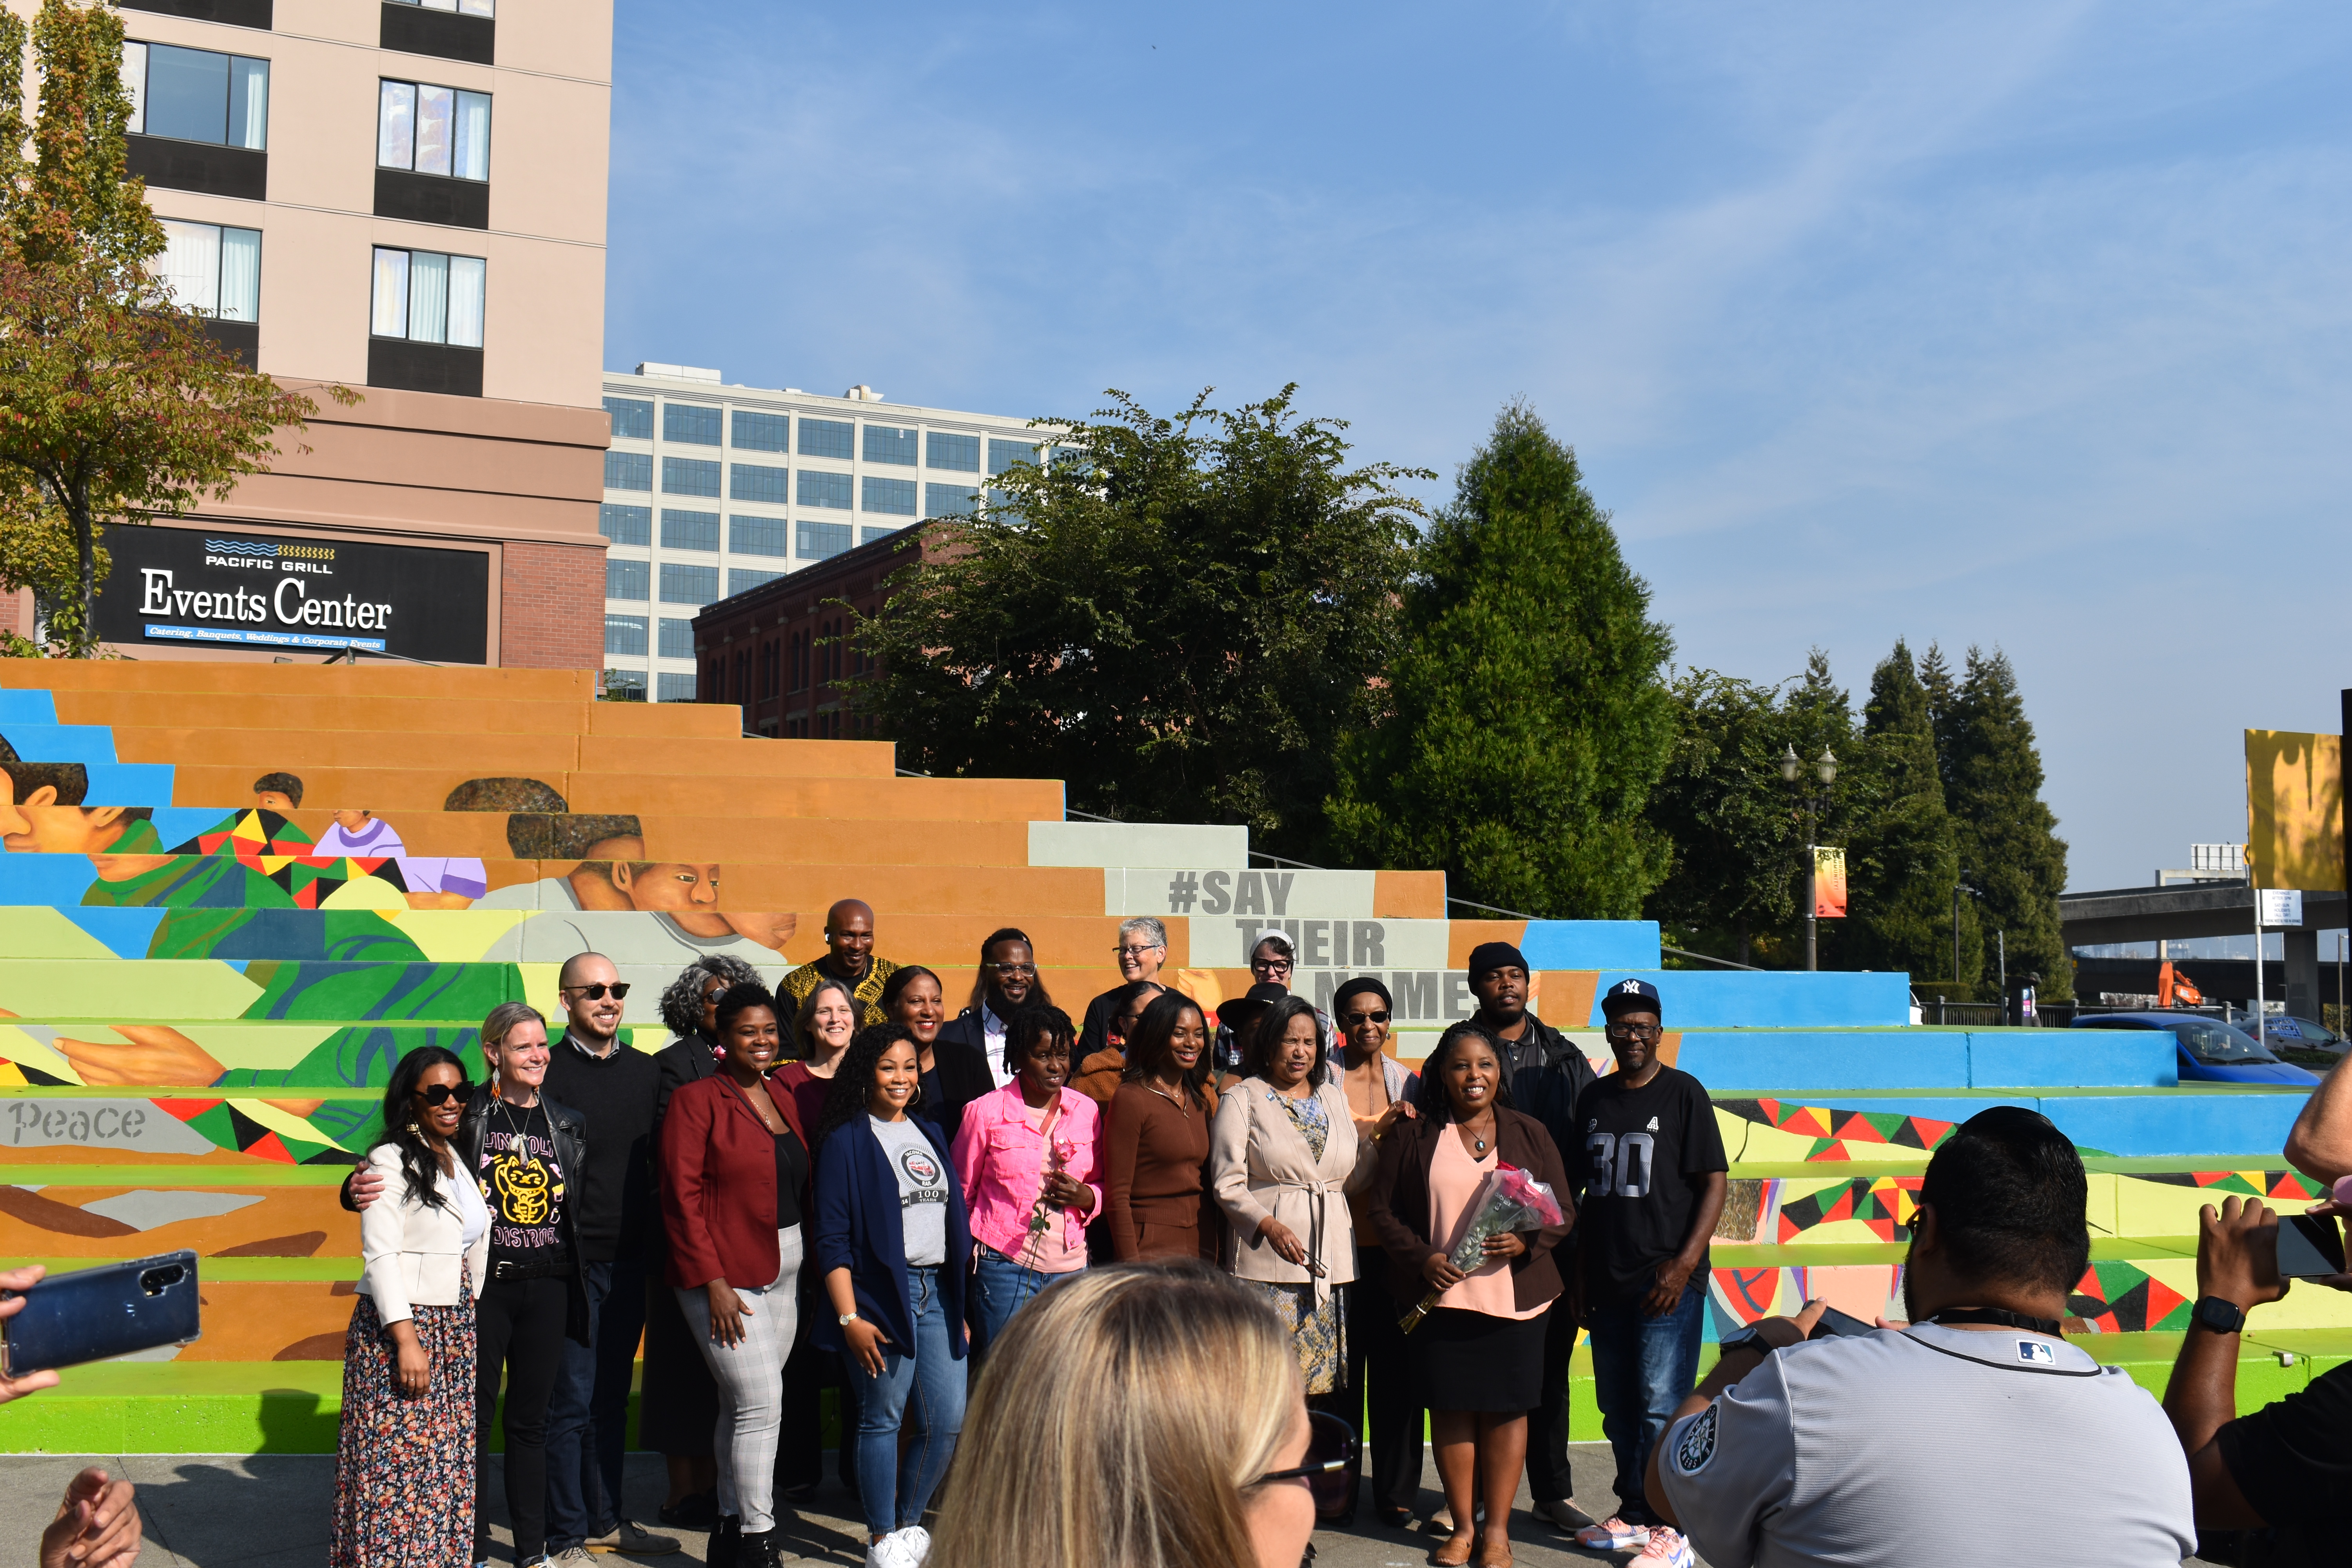 Some of the people who made Tacoma's Black Lives Matter mural come together, including lead-artist Dionne Bonner holding a bouquet of flowers, with Mayor Victoria Woodards on her right. Photo by Lauren Gallup.